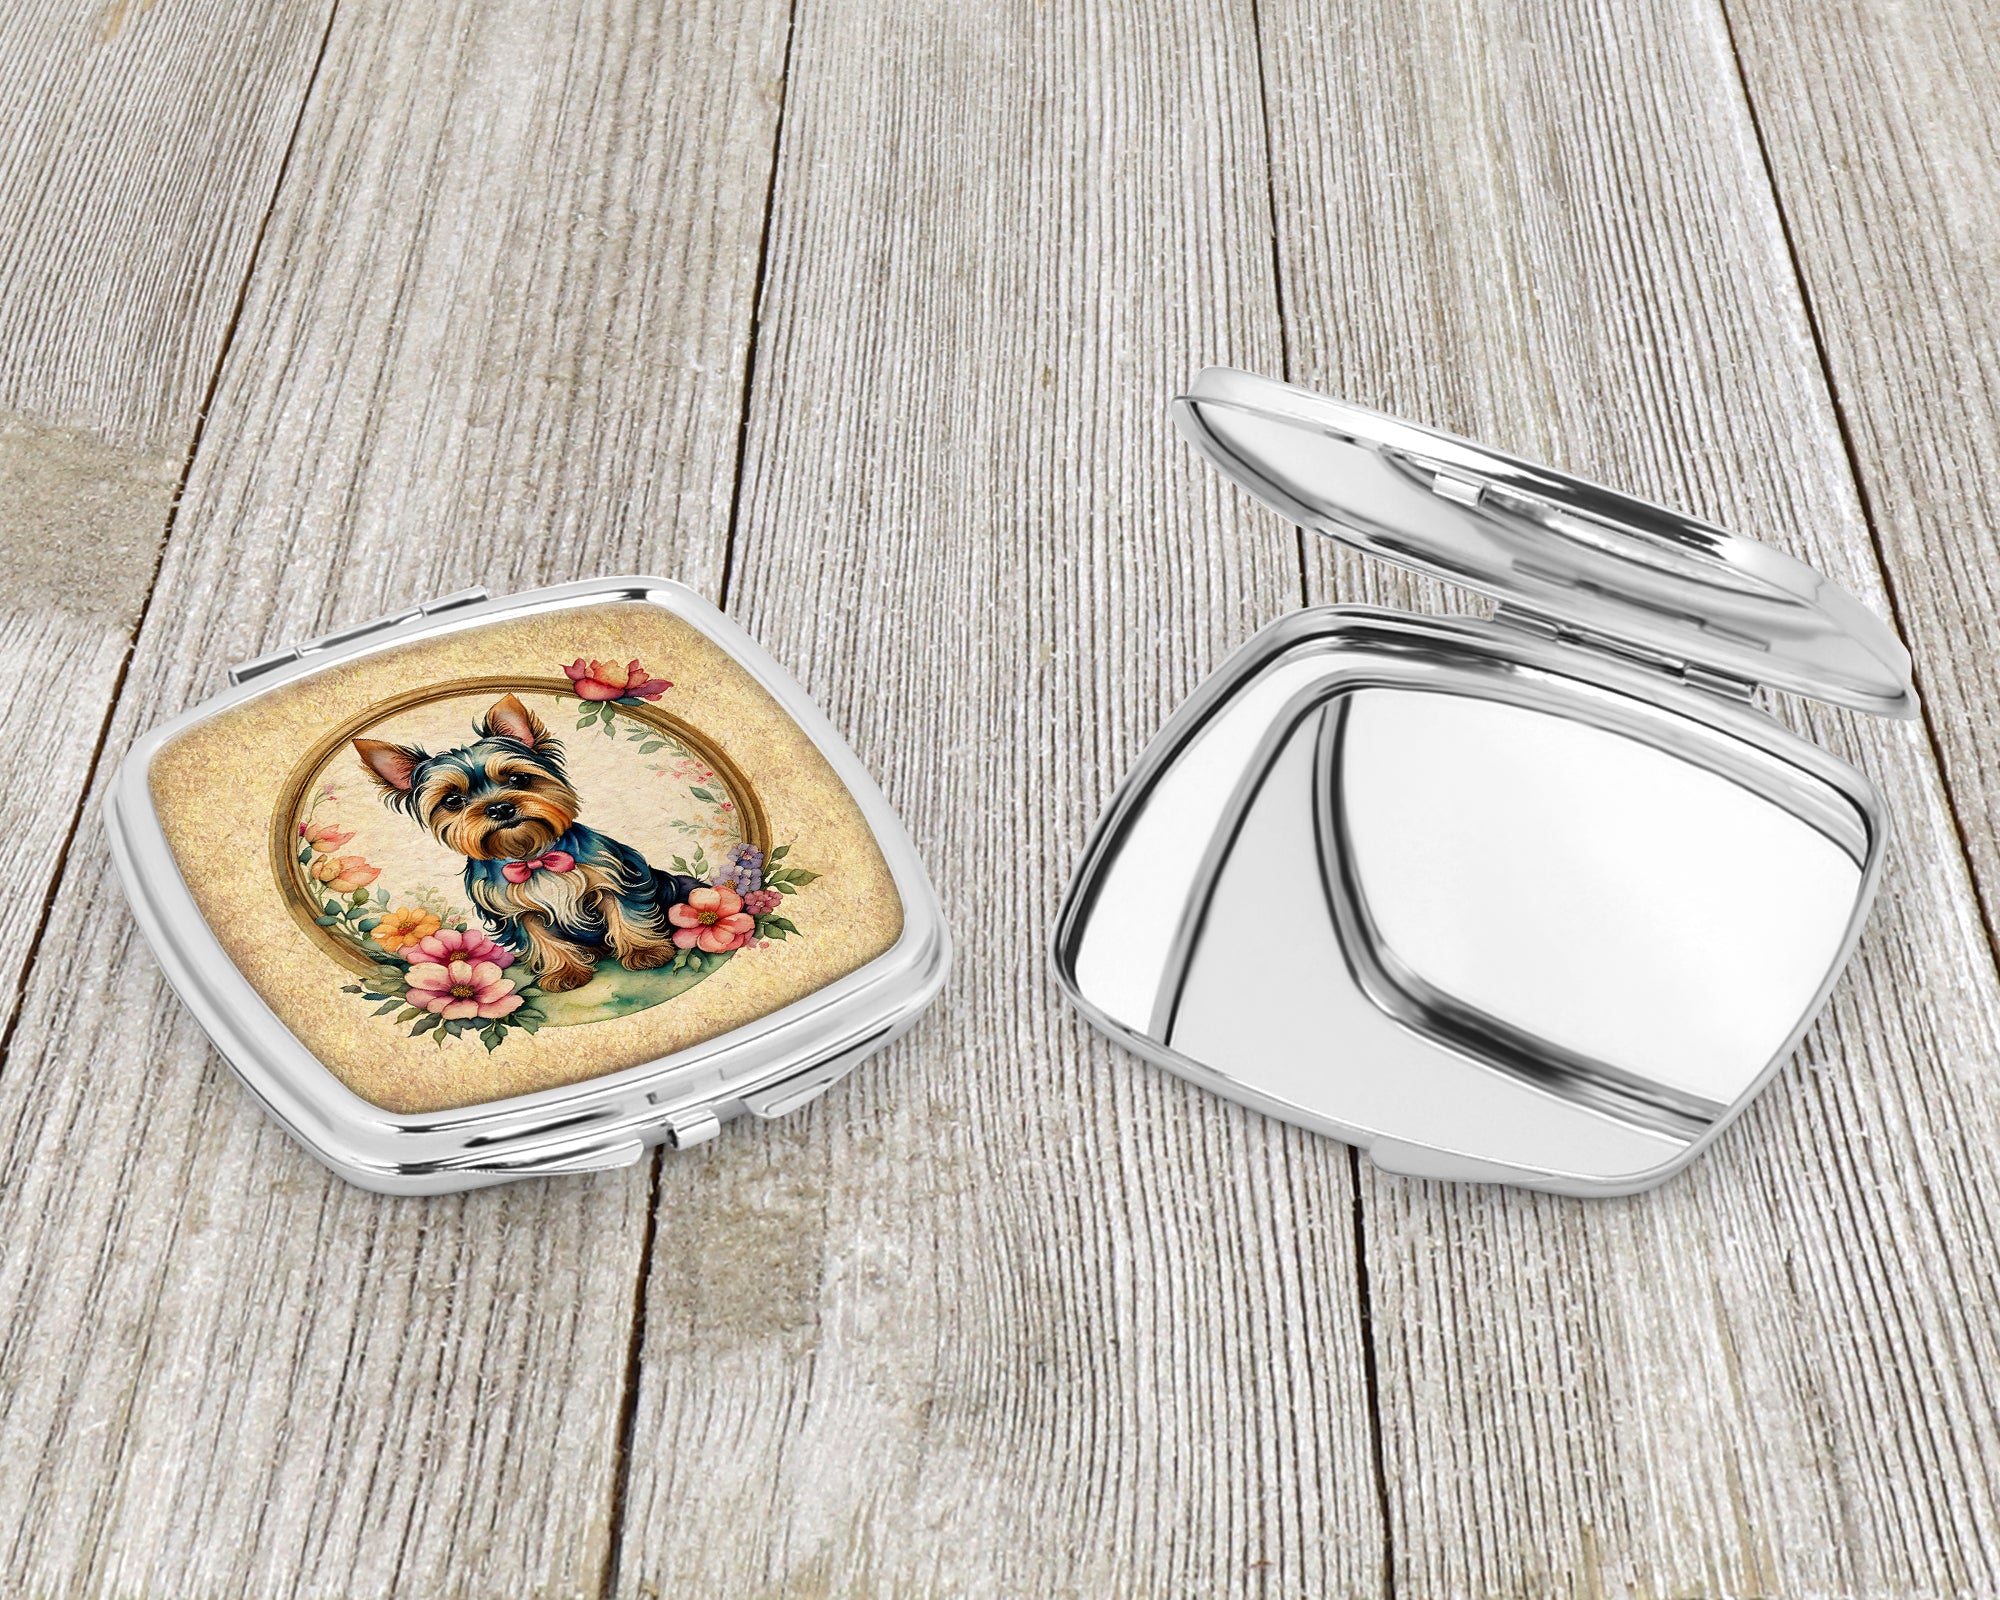 Yorkshire Terrier and Flowers Compact Mirror